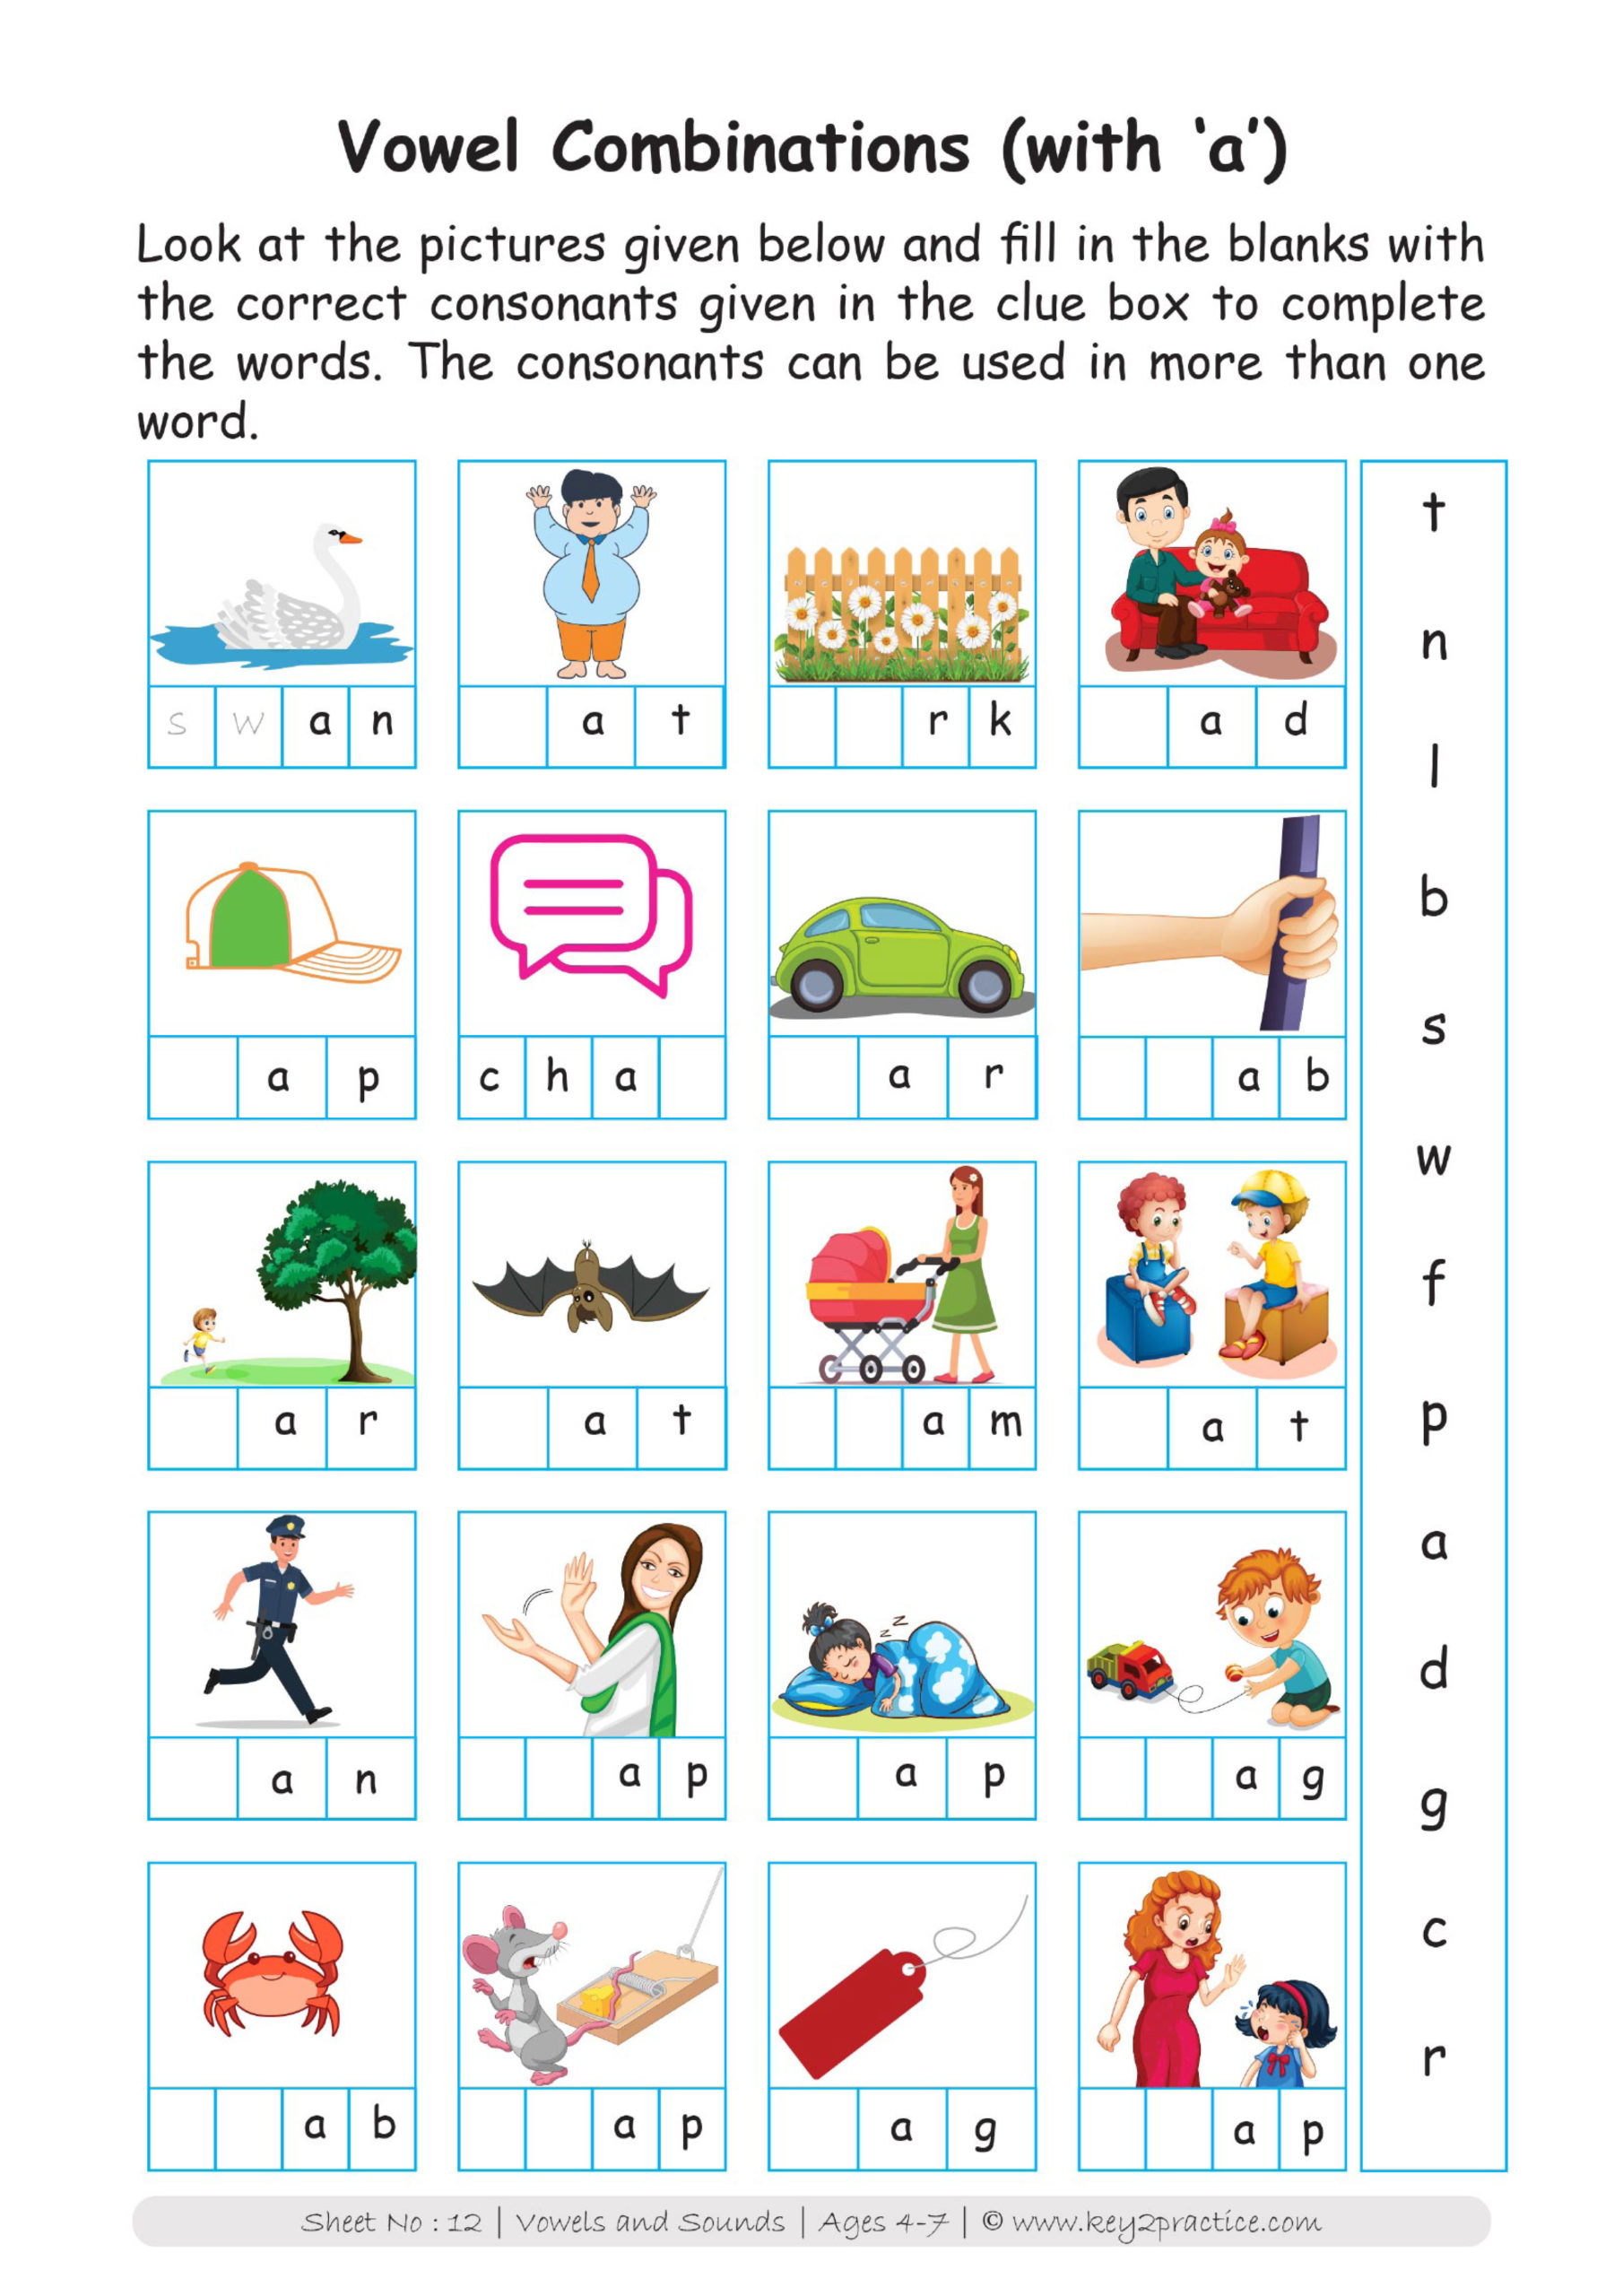 Vowels and Consonants Worksheets I Pre-primary classes - key2practice